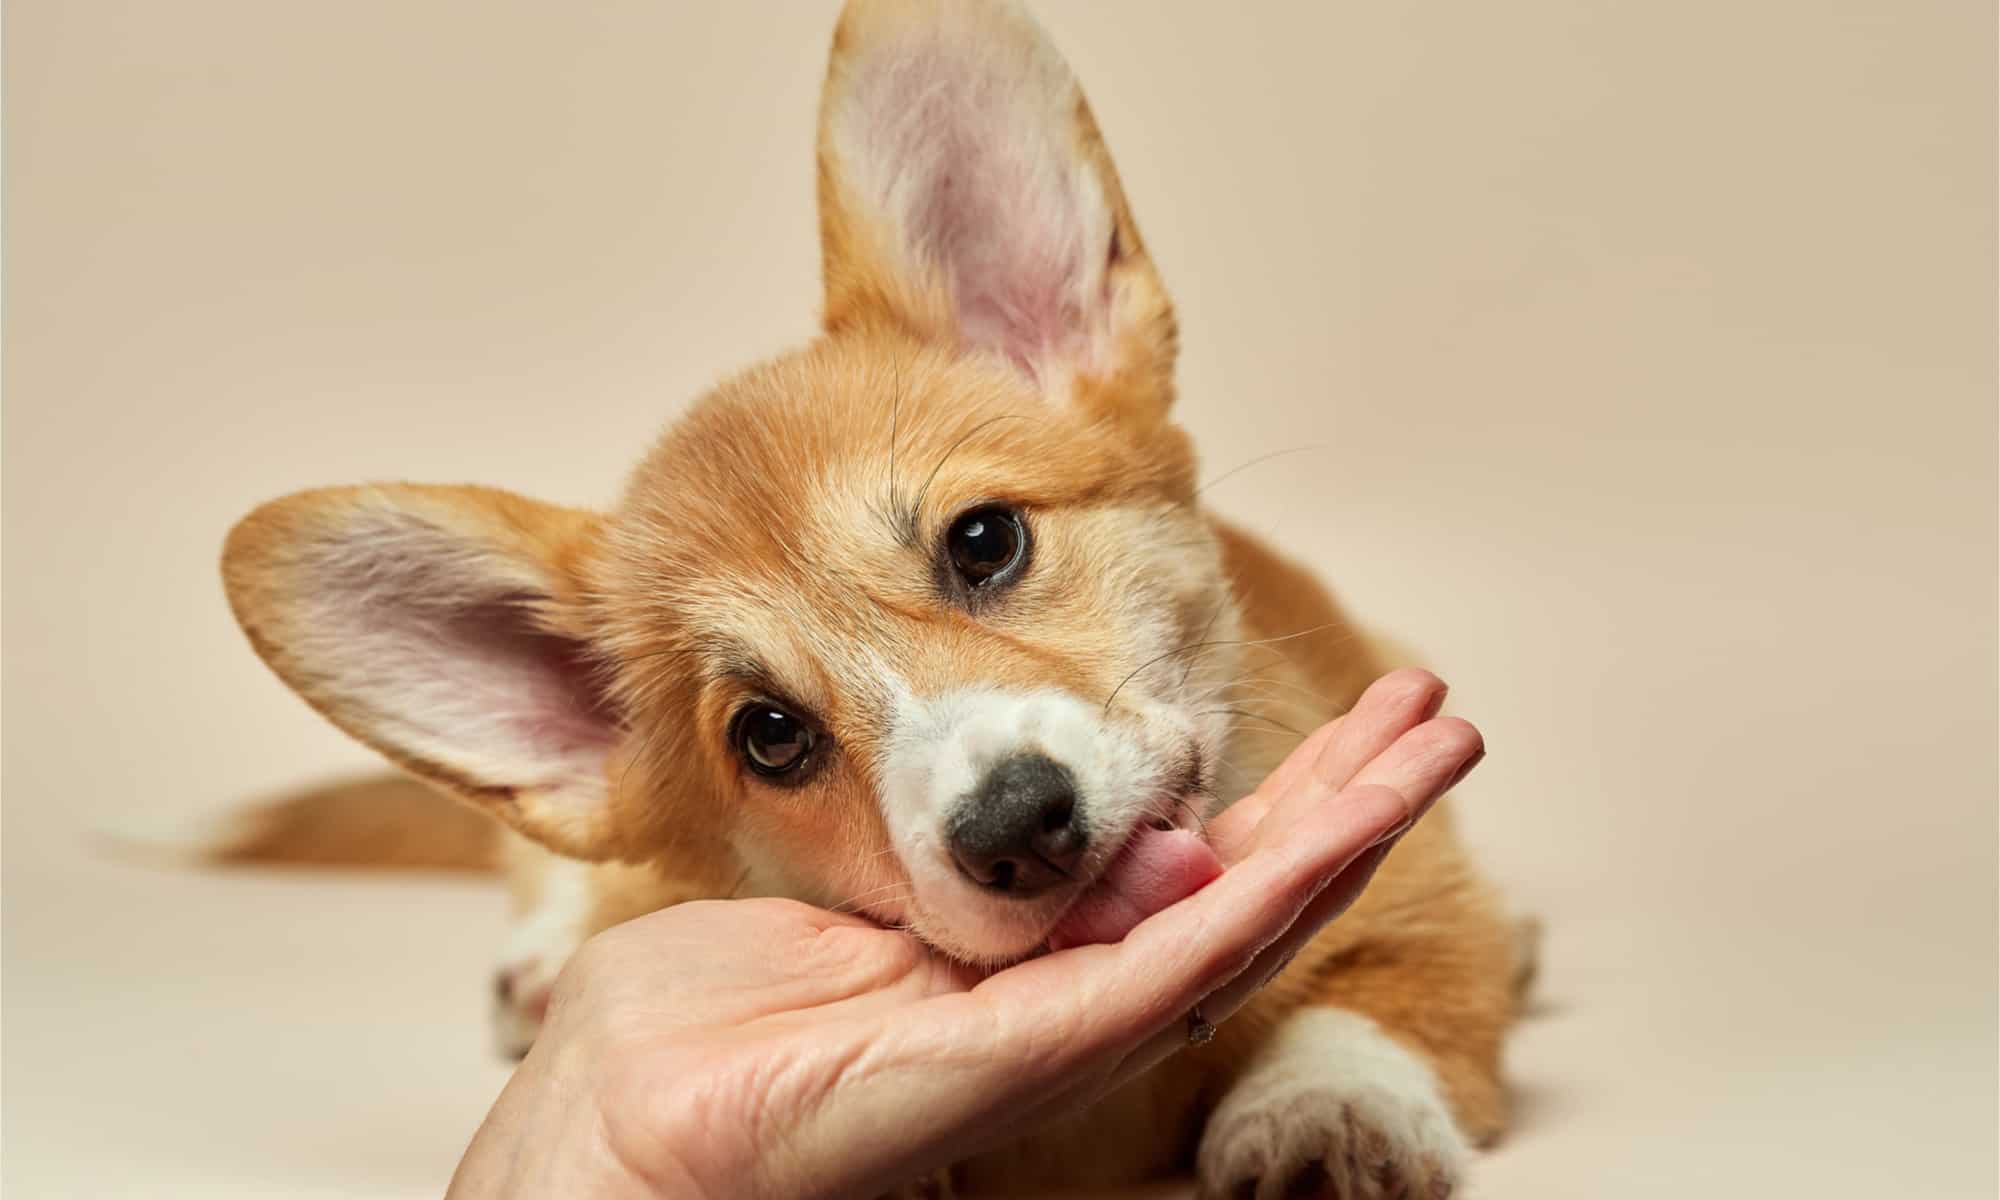 A corgi puppy licking its owner's hand